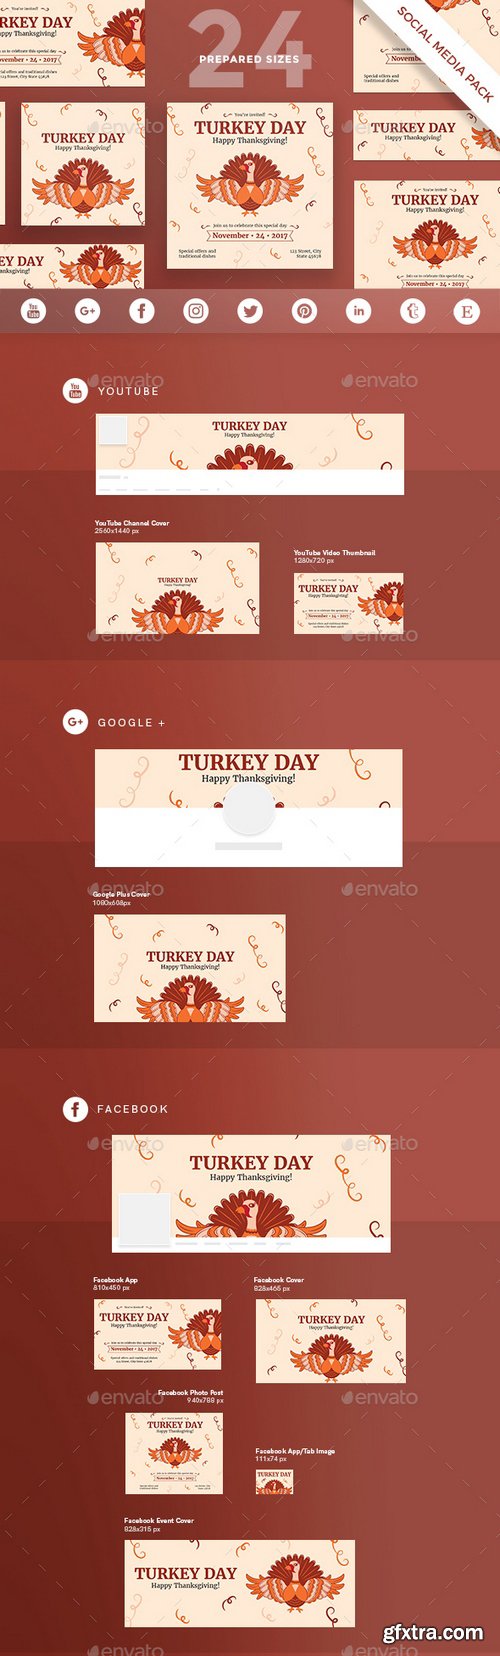 Graphicriver - Turkey Day Social Media Pack 20792428